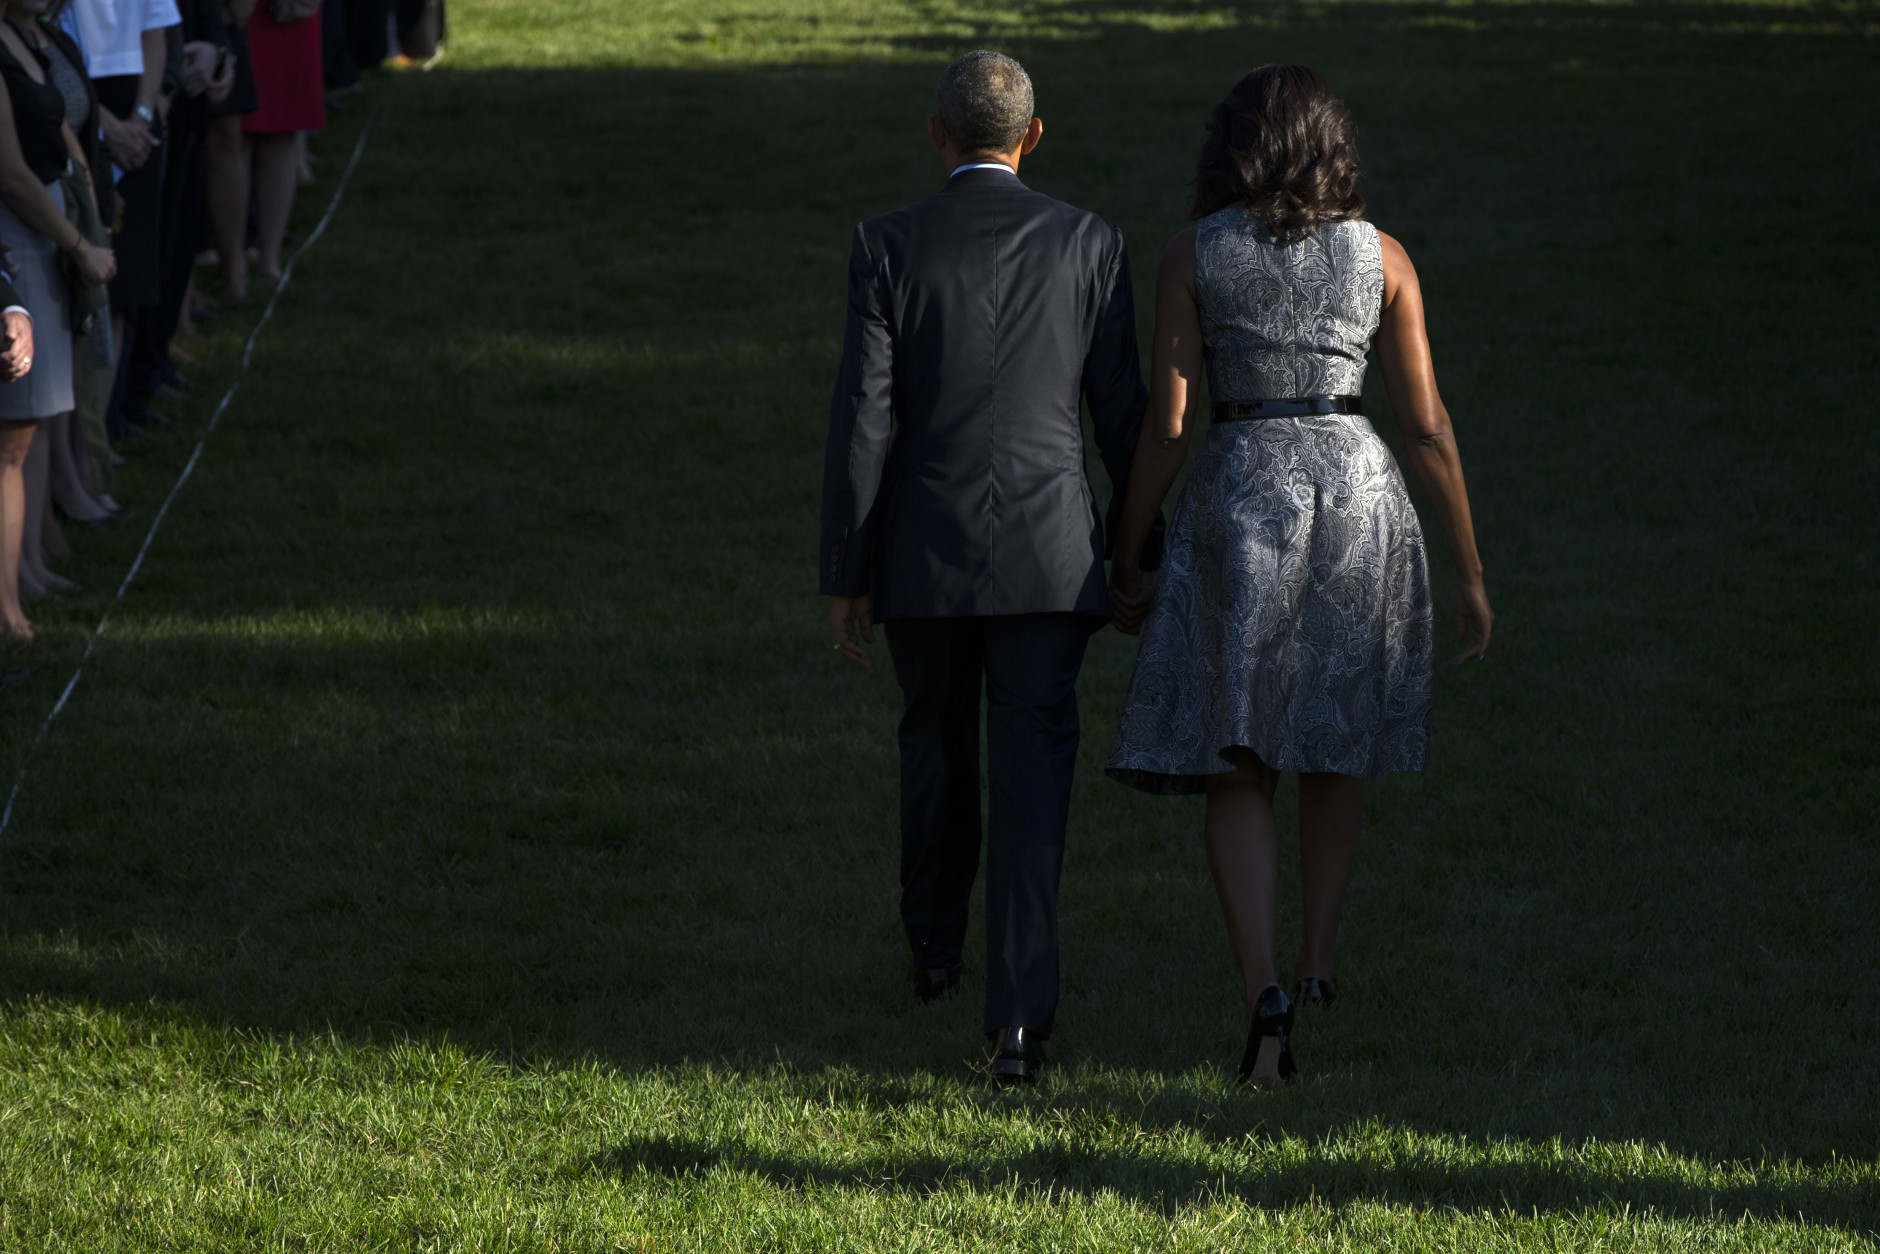 President Barack Obama and first lady Michelle Obama walk off the South Lawn of the White House in Washington, Friday, Sept. 11, 2015, after they observed the 14th anniversary of the 9/11 terrorists attacks. (AP Photo/Evan Vucci)